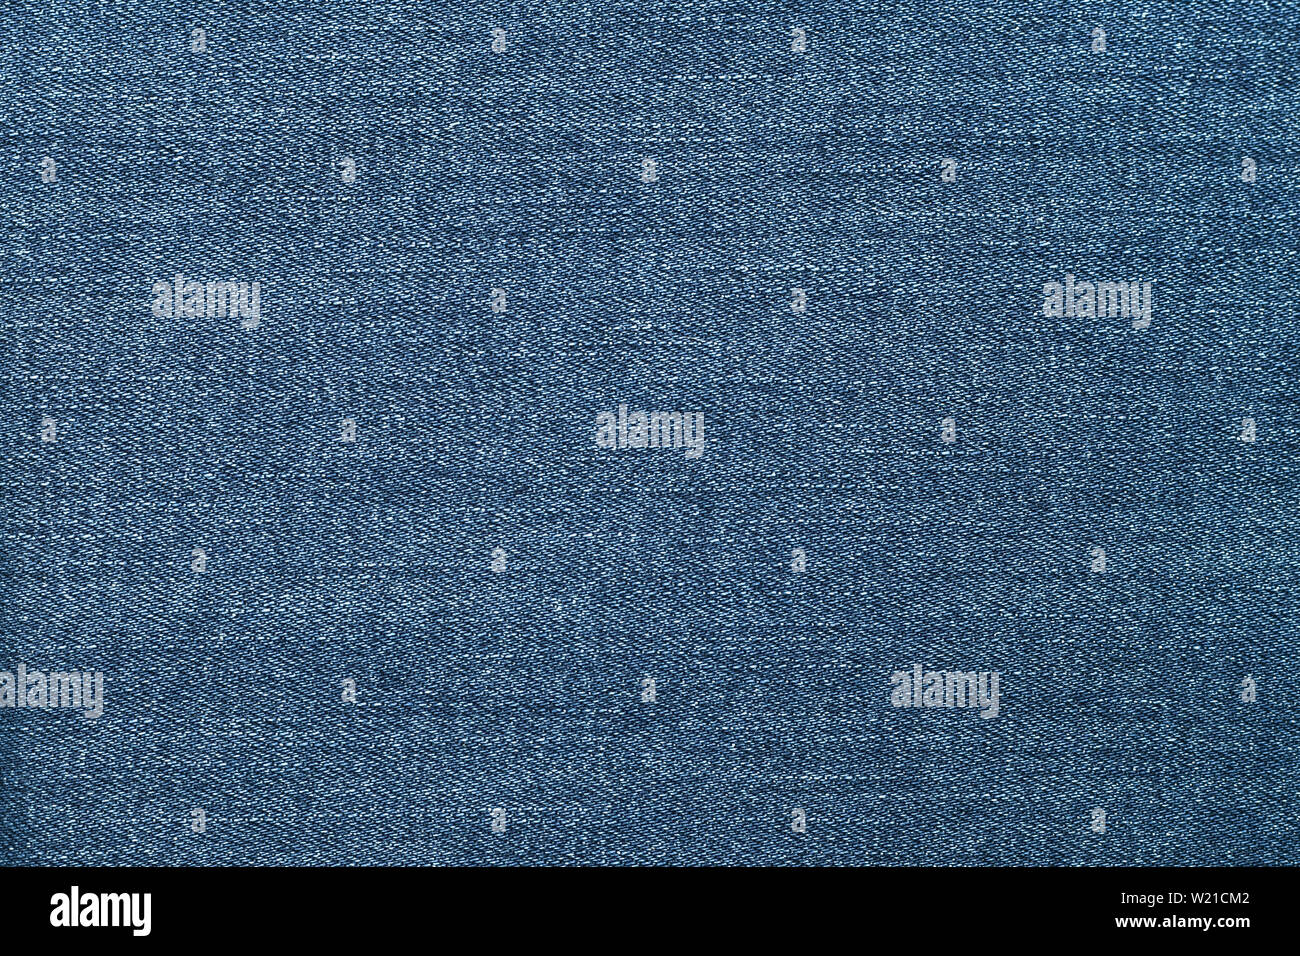 Blue jeans texture. Abstract pattern on blue jean background. Canvas ...